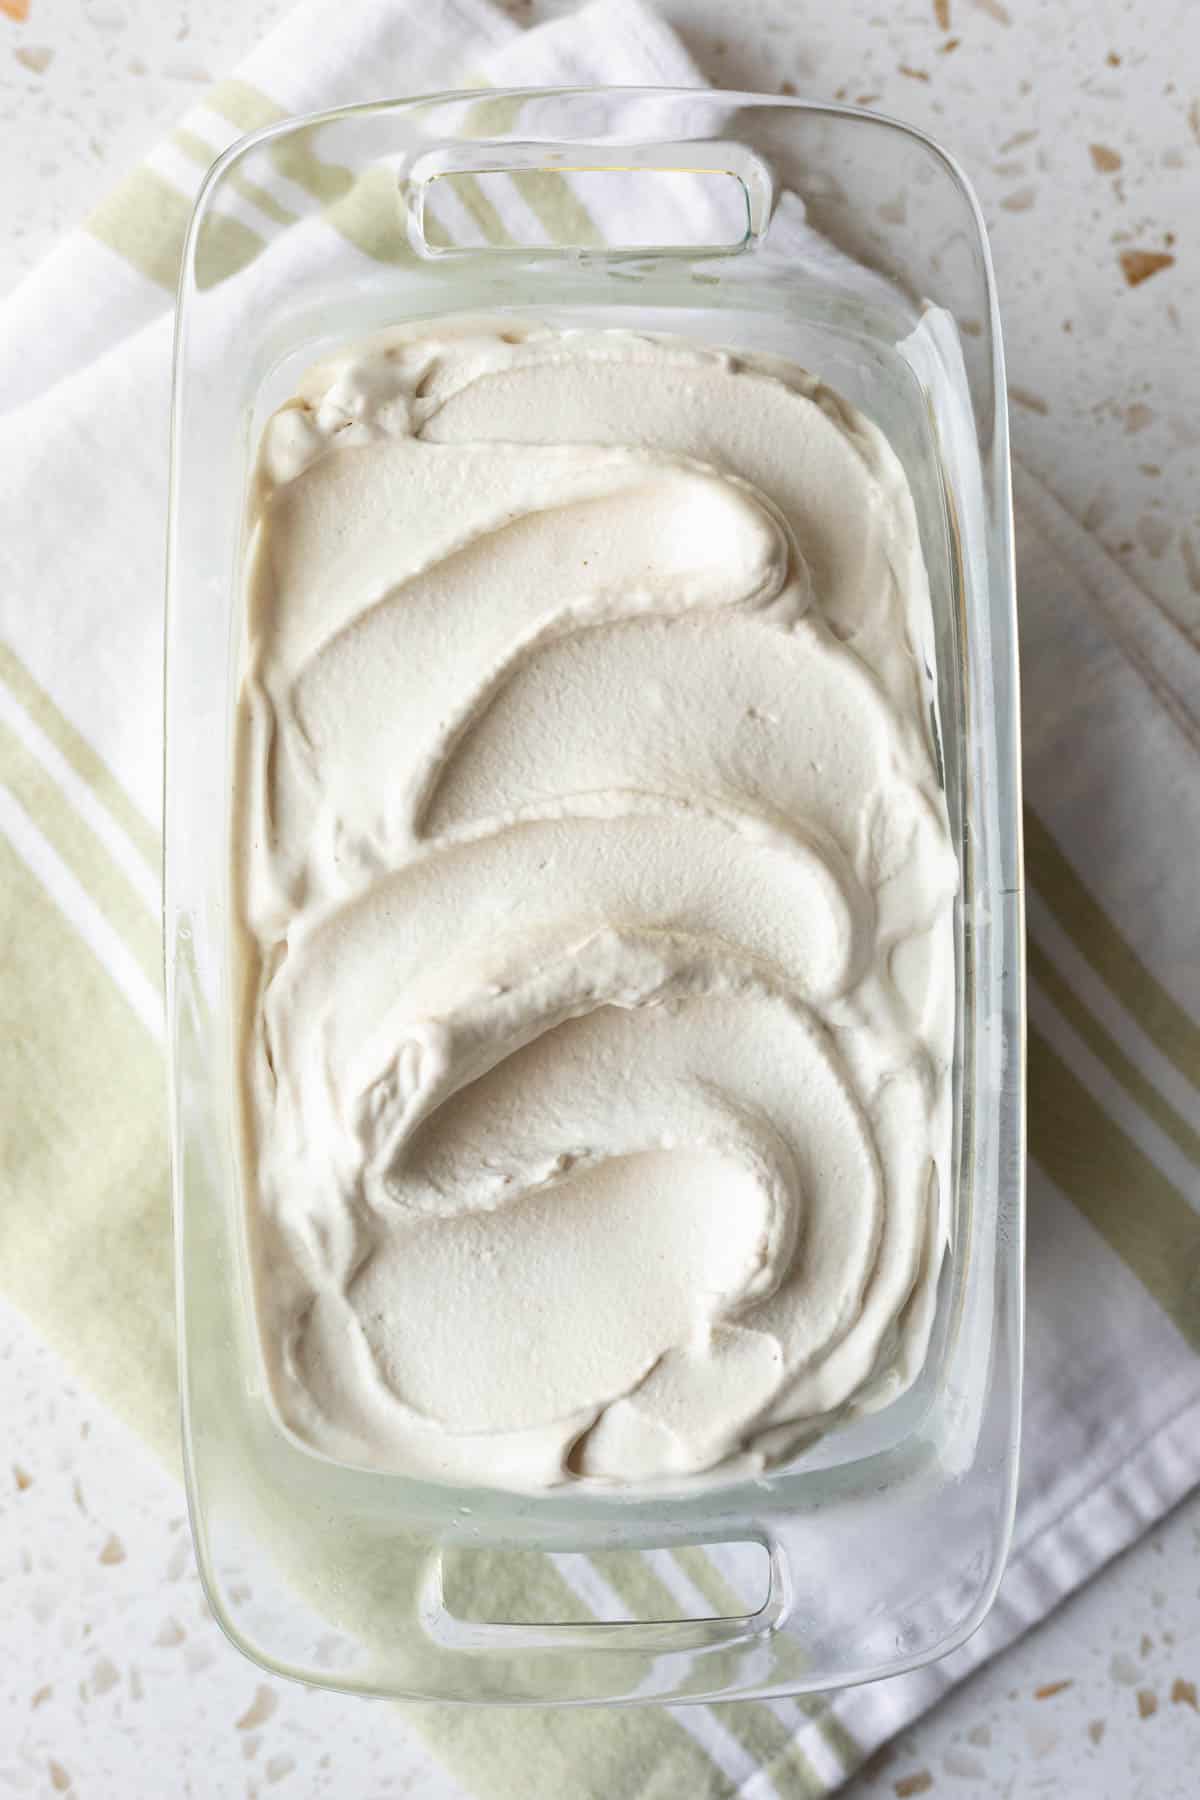 Soft-serve consistency ice cream after churning spread in a glass dish to be frozen.